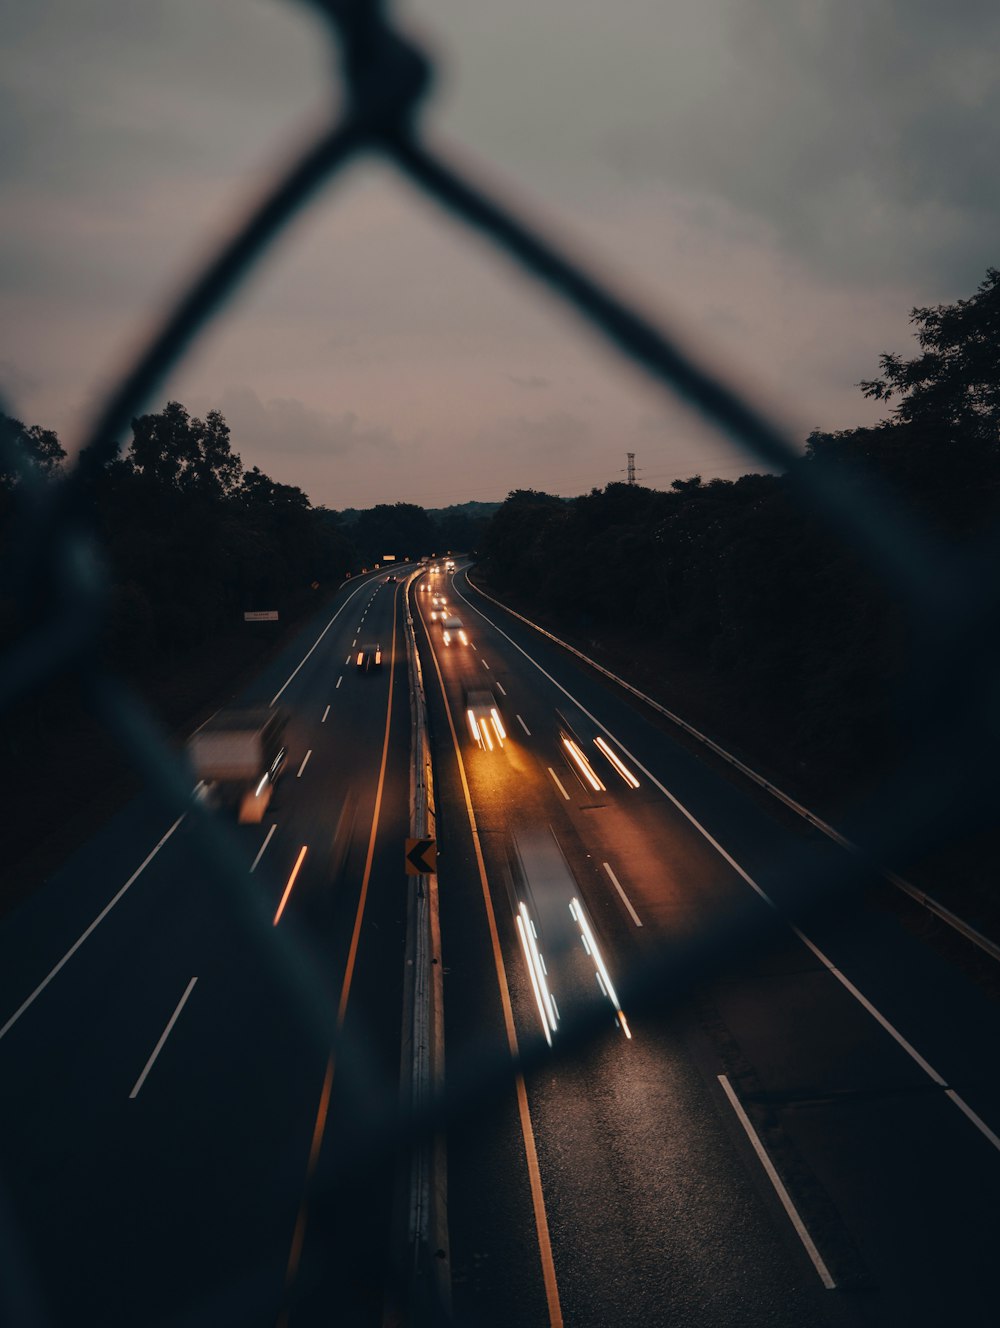 a view of a highway at night through a chain link fence